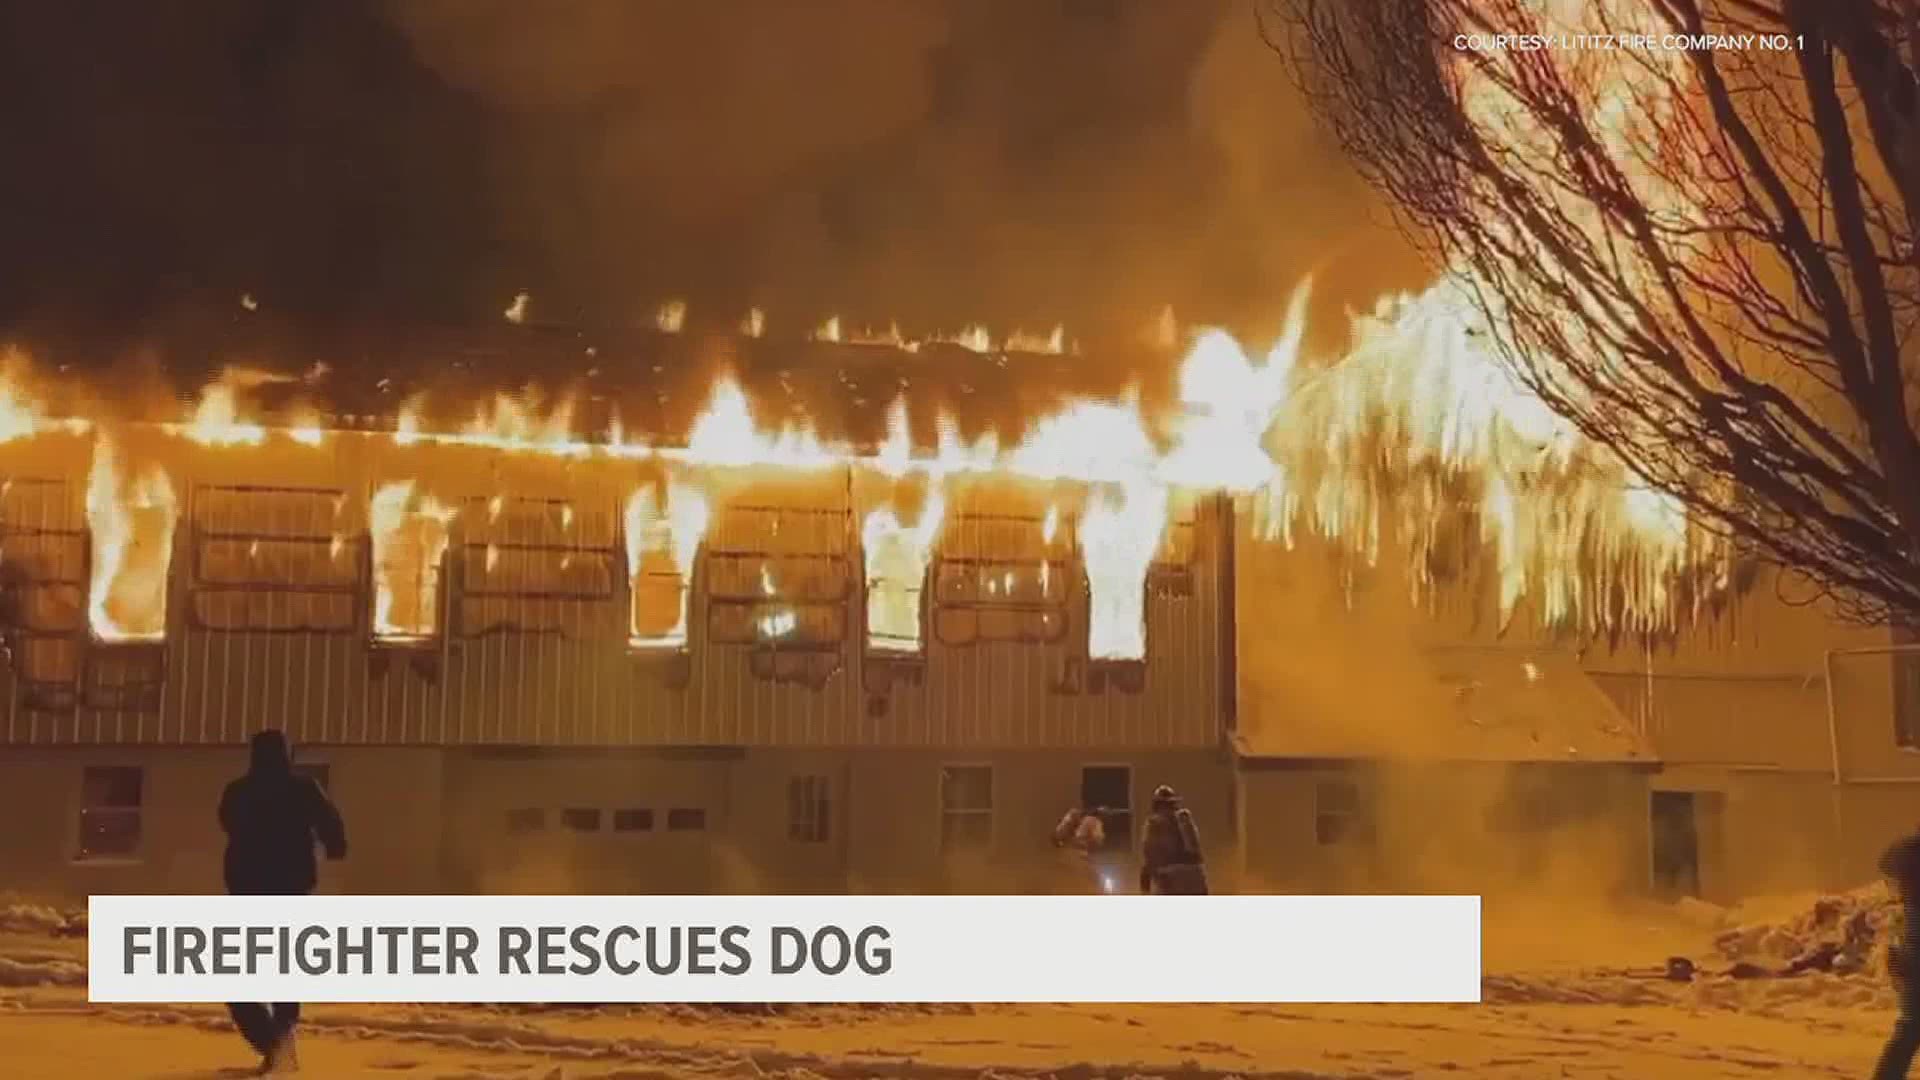 A dog was rescued from a barn that was engulfed in flames over the weekend, and a camera that was on top of one of the firefighter's helmet captured the moment